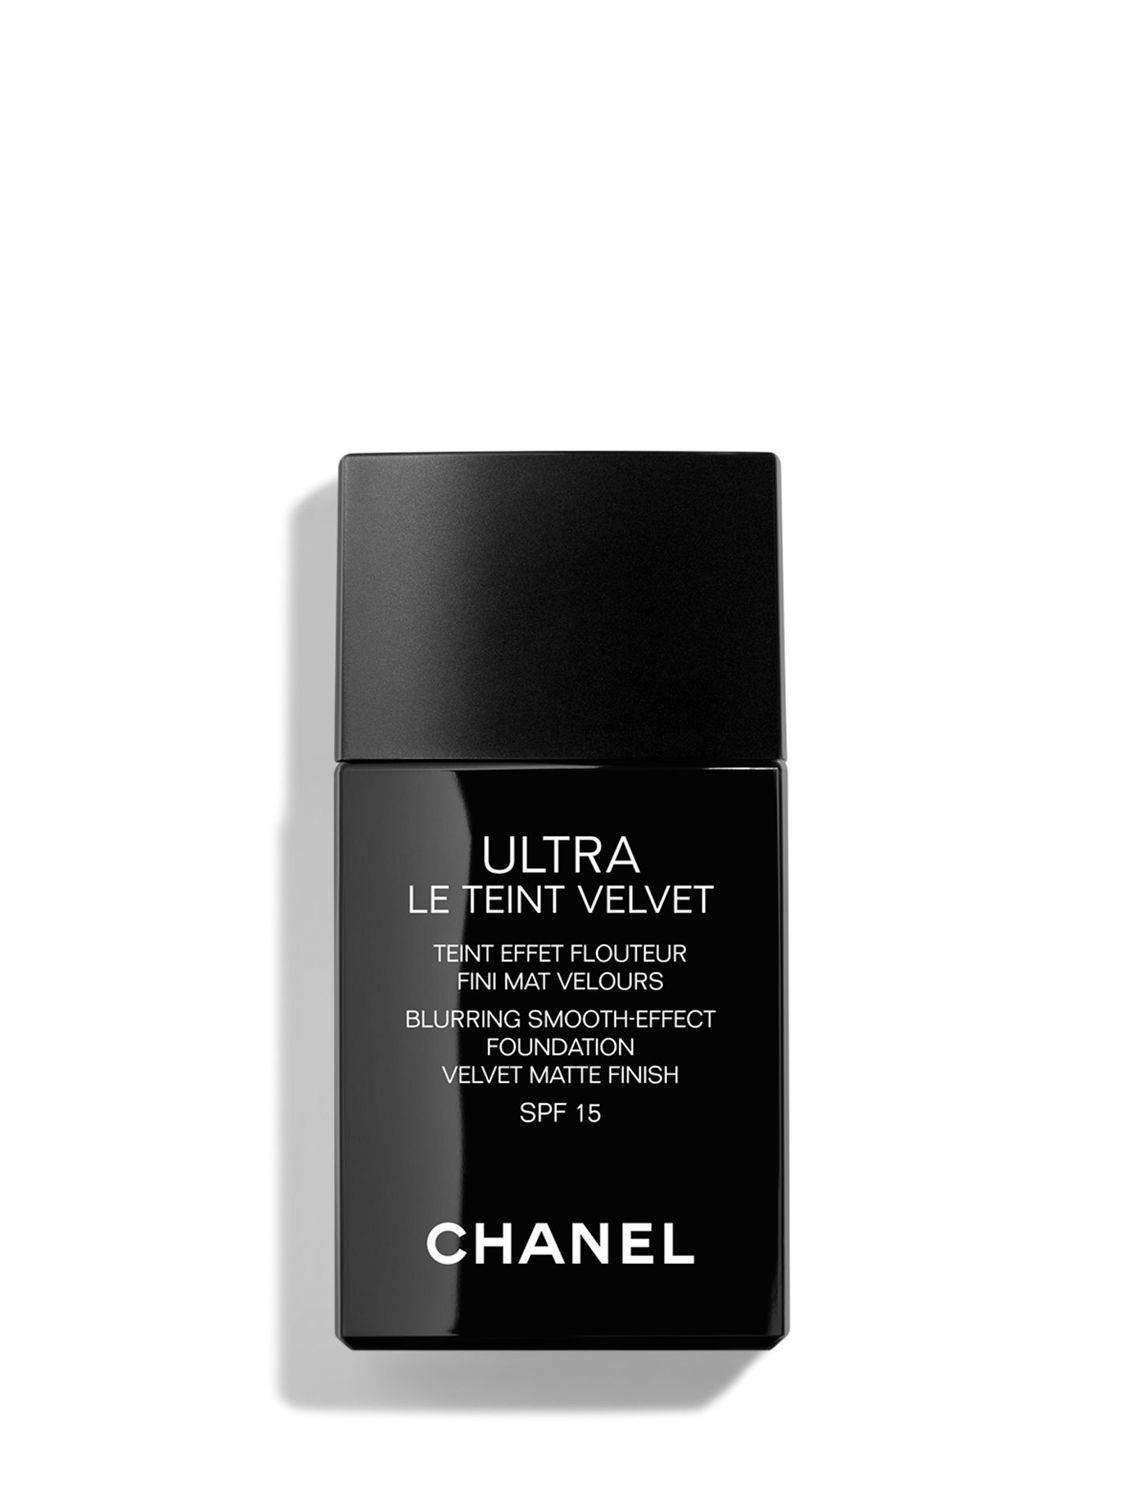 CHANEL Ultra Le Teint Velvet Ultra-Light And Longwearing Formula Blurring  Matte Finish Perfect Natural Complexion, Beige 40 at John Lewis & Partners